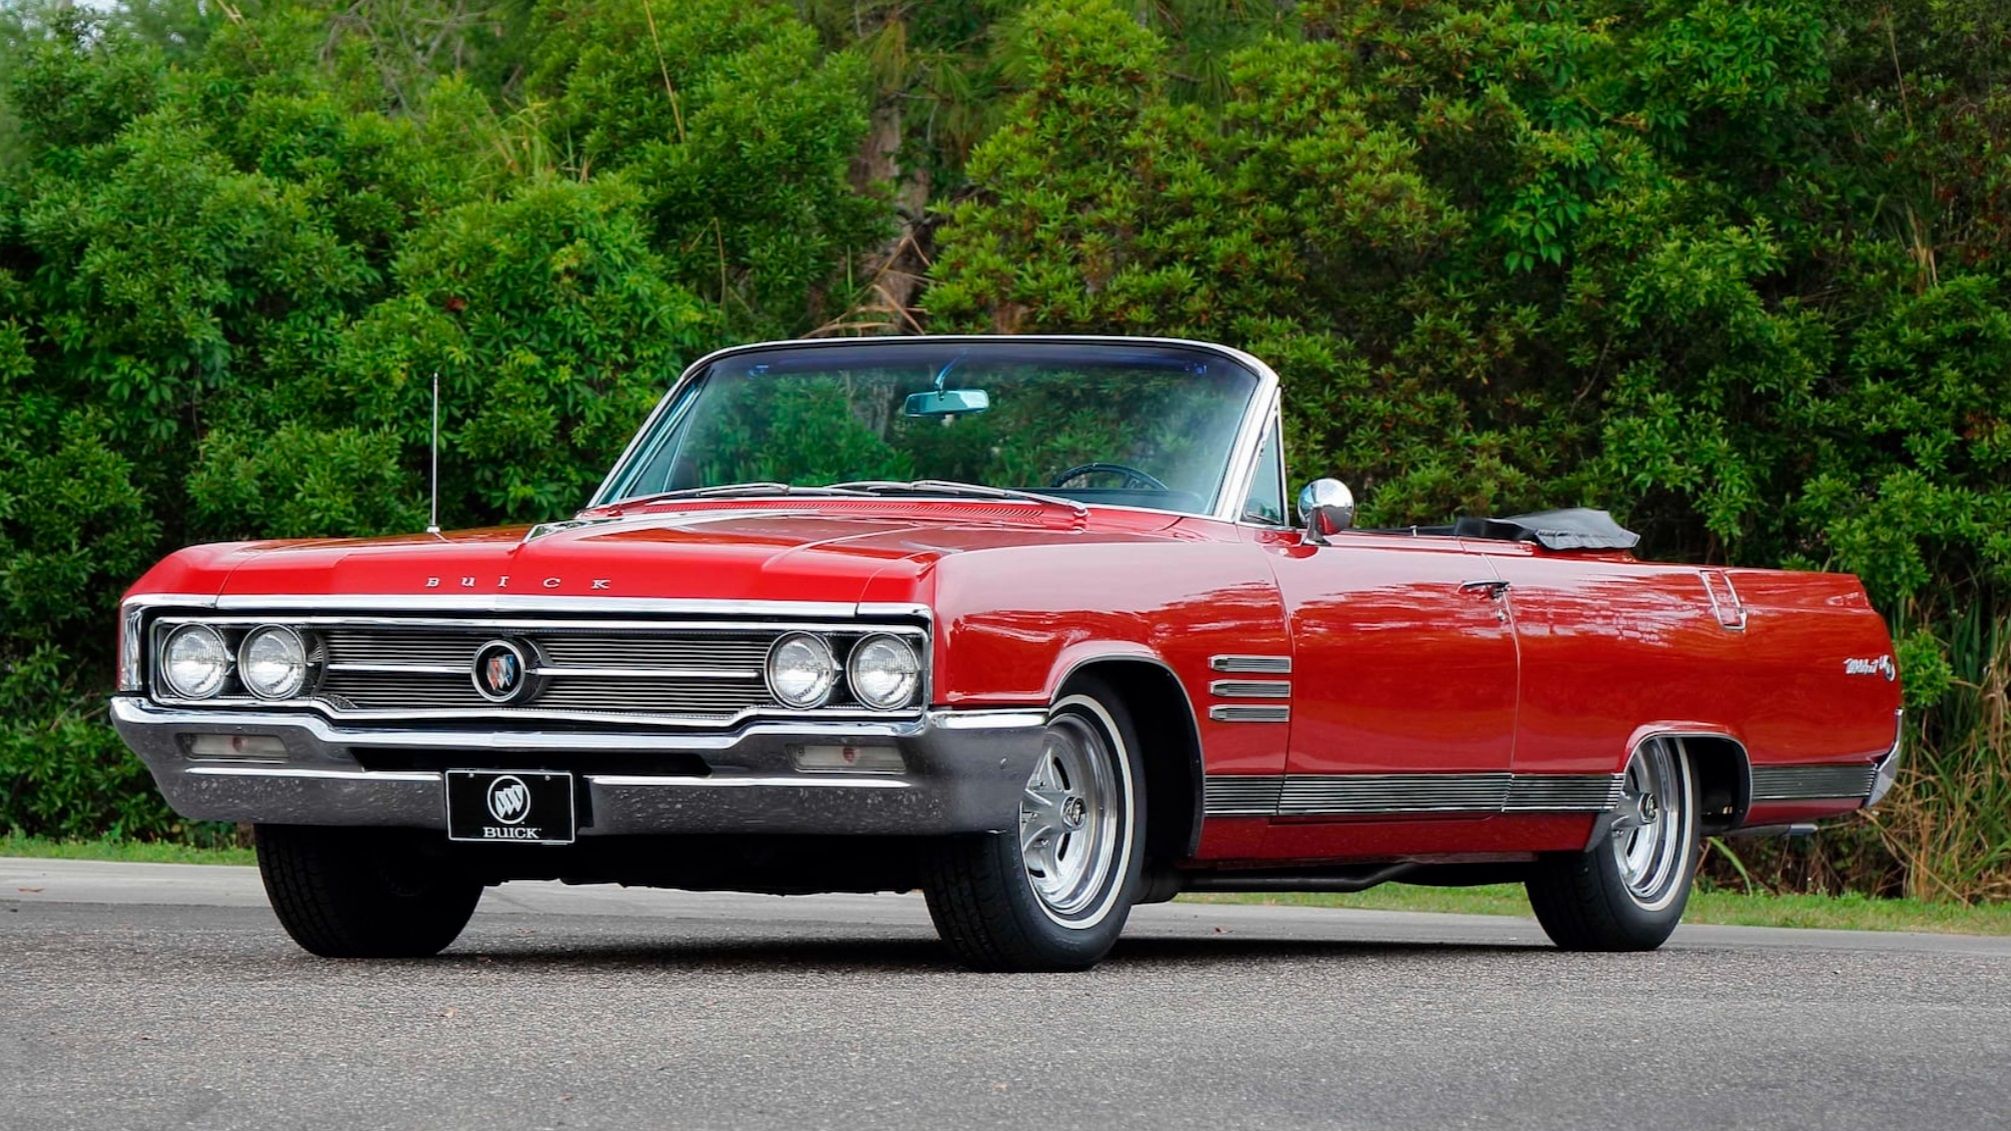 The 1964 Buick Wildcat Convertible parked outdoors.